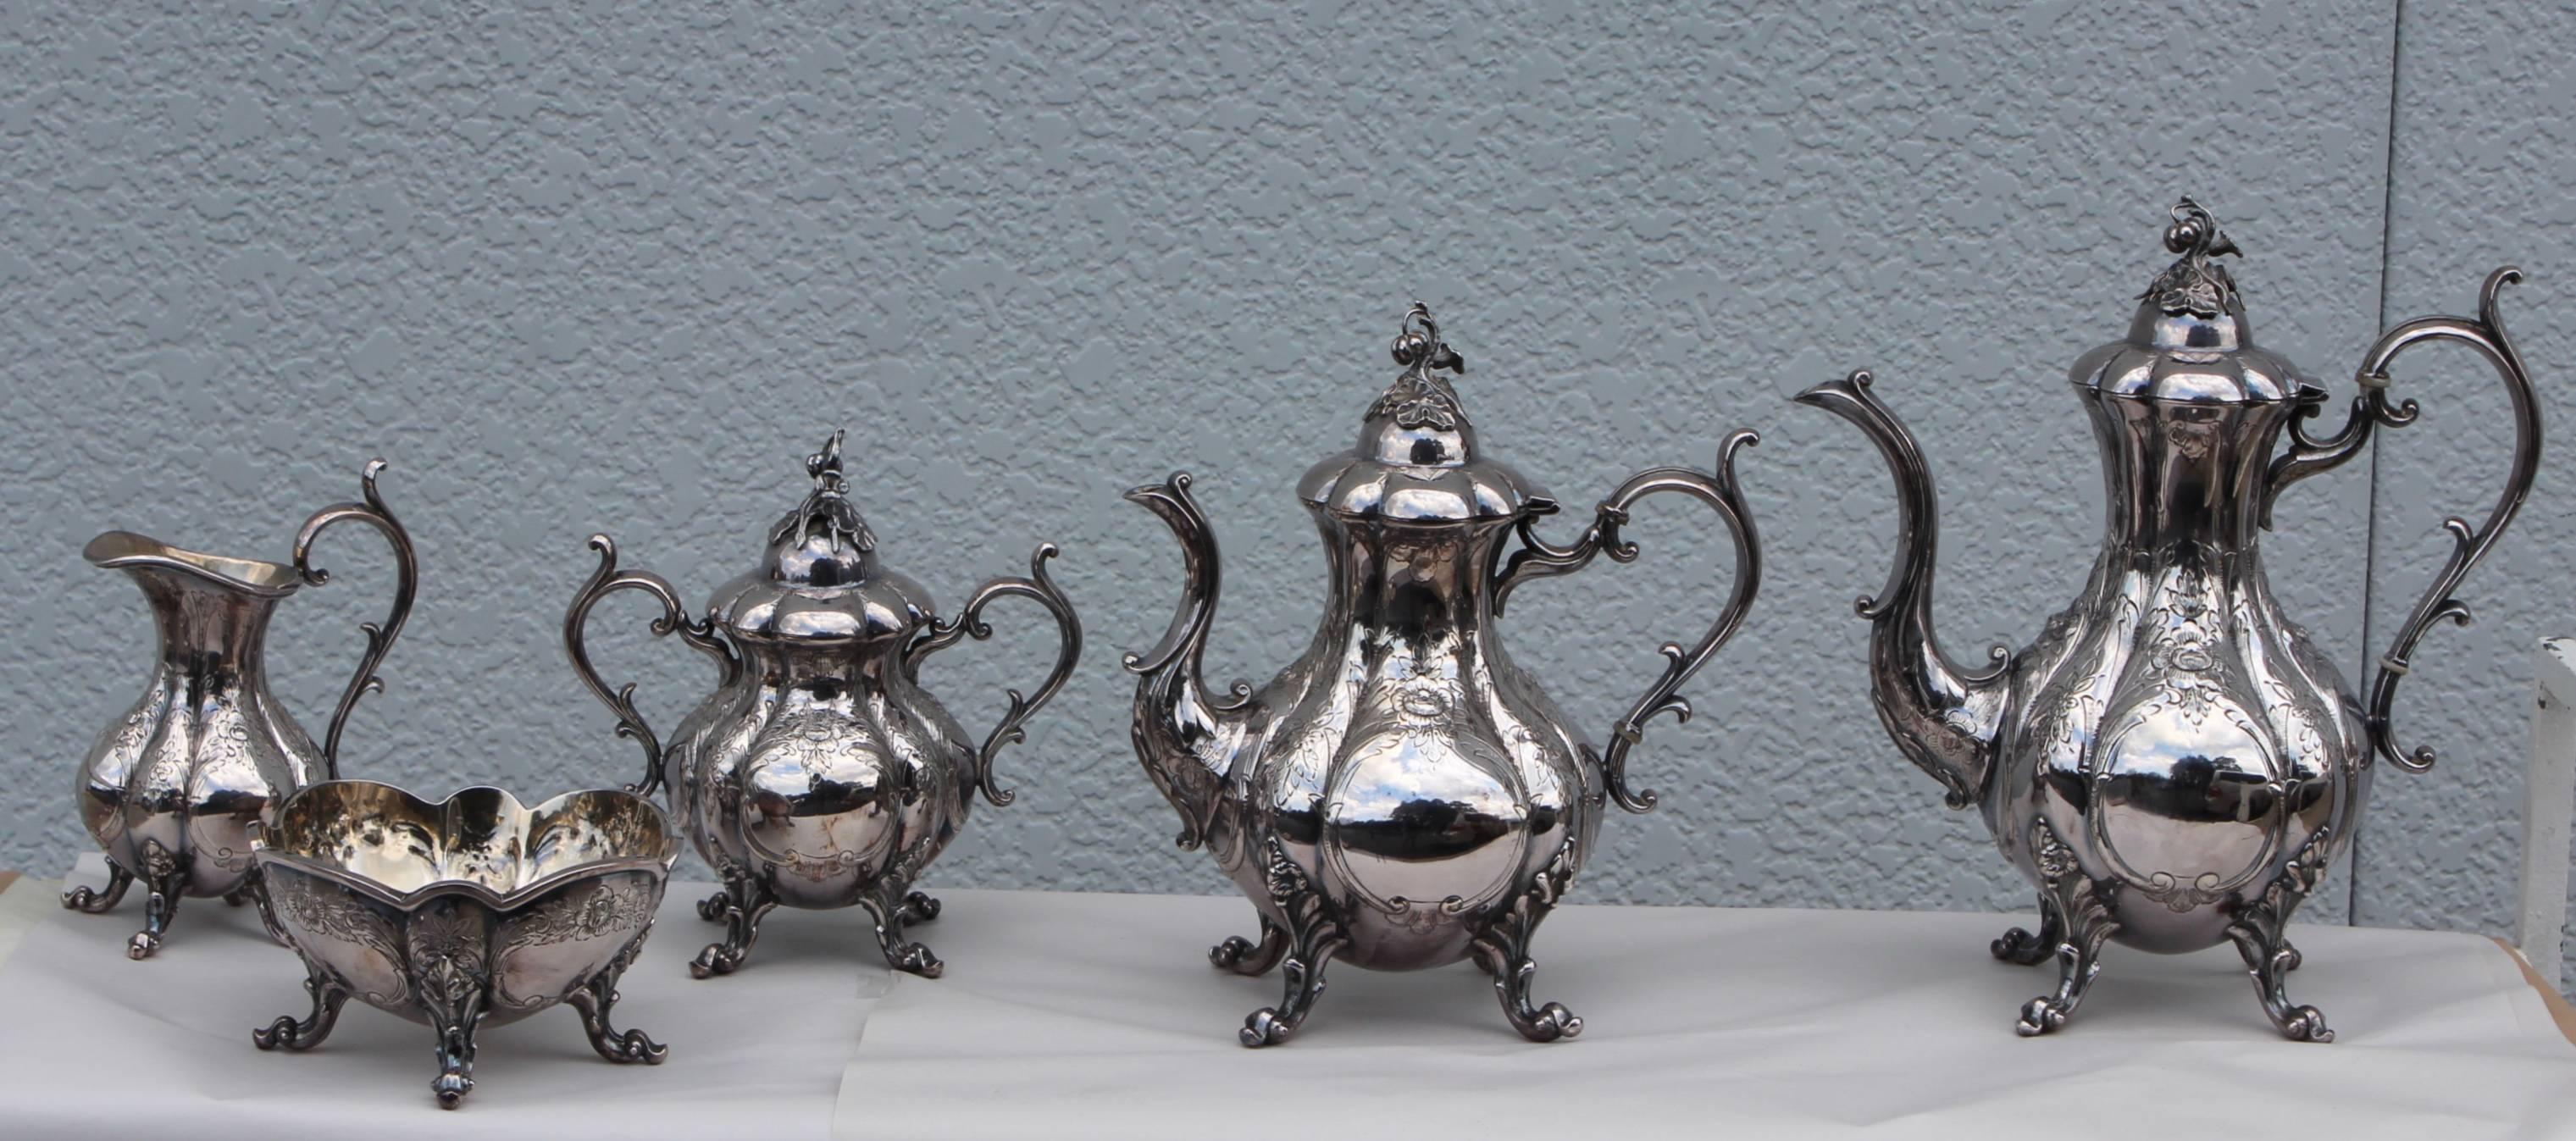 1940s Reed & Barton hand chased tea set.

Set includes:
Large coffee pot height 12'' depth 6'' width 11''
Tea pot height 10.5'' depth 6.5'' width 9.5''
Creamer height 7.25'' depth 4'' width 5.5''
 Sugar covered bowl height 8'' width 8'' depth